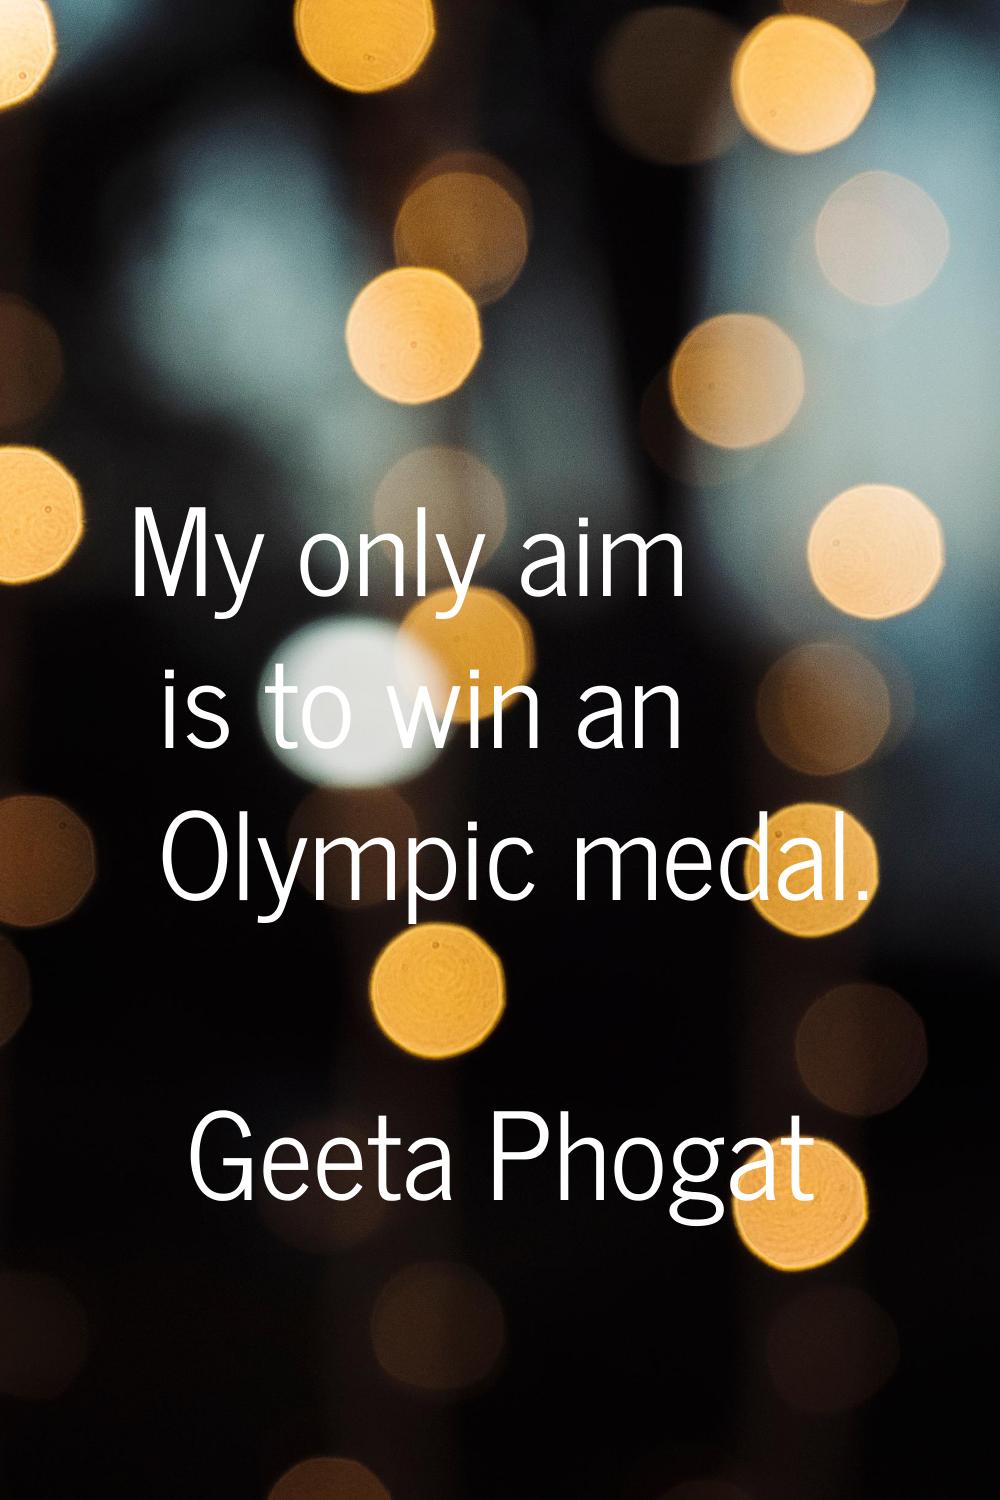 My only aim is to win an Olympic medal.